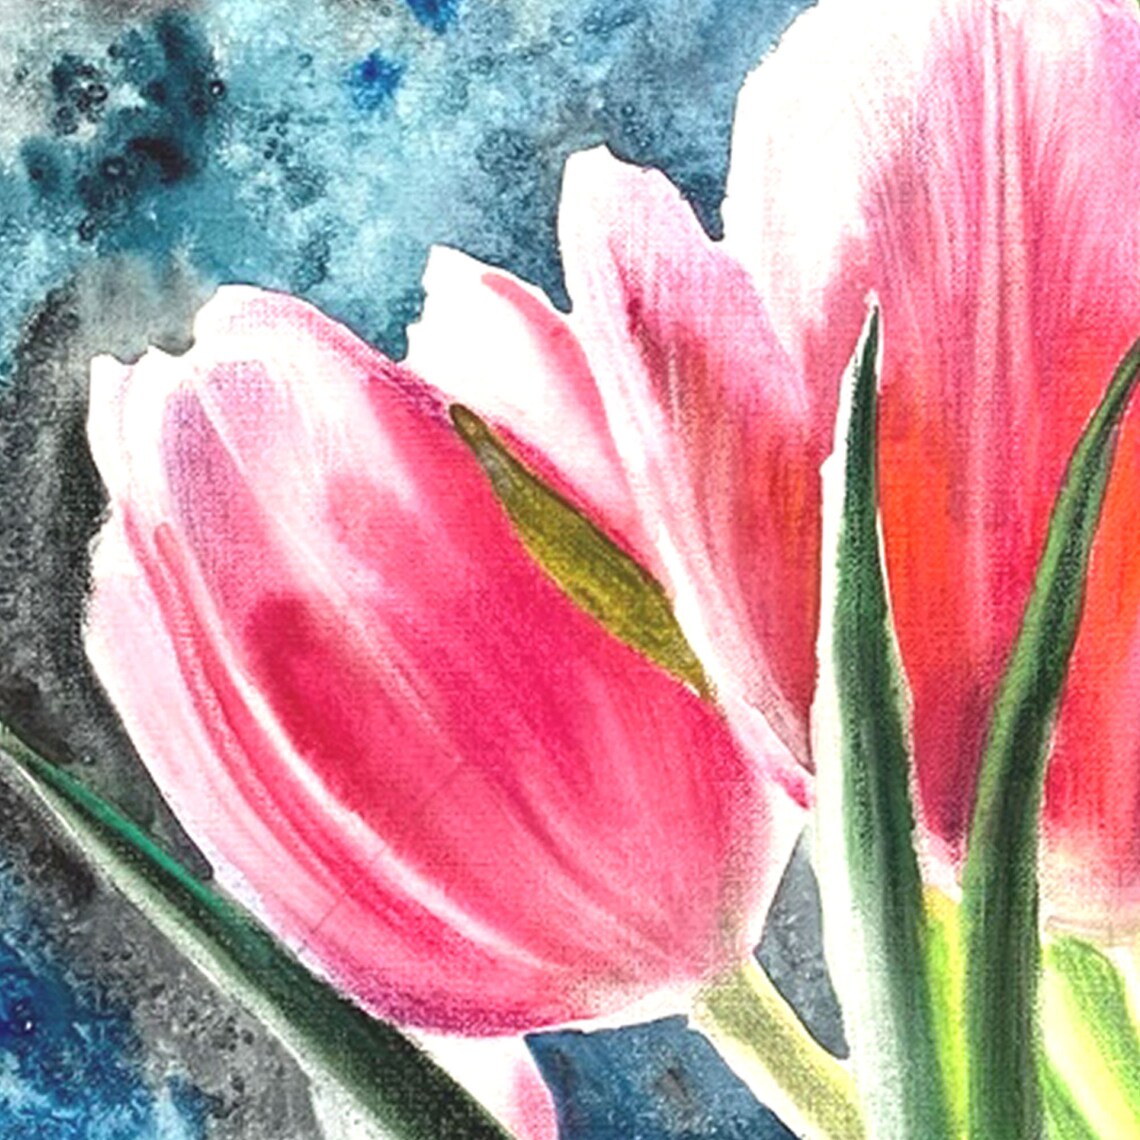 Pink Tulips Watercolor & Pastel Painting Flowers Wall Art | Etsy